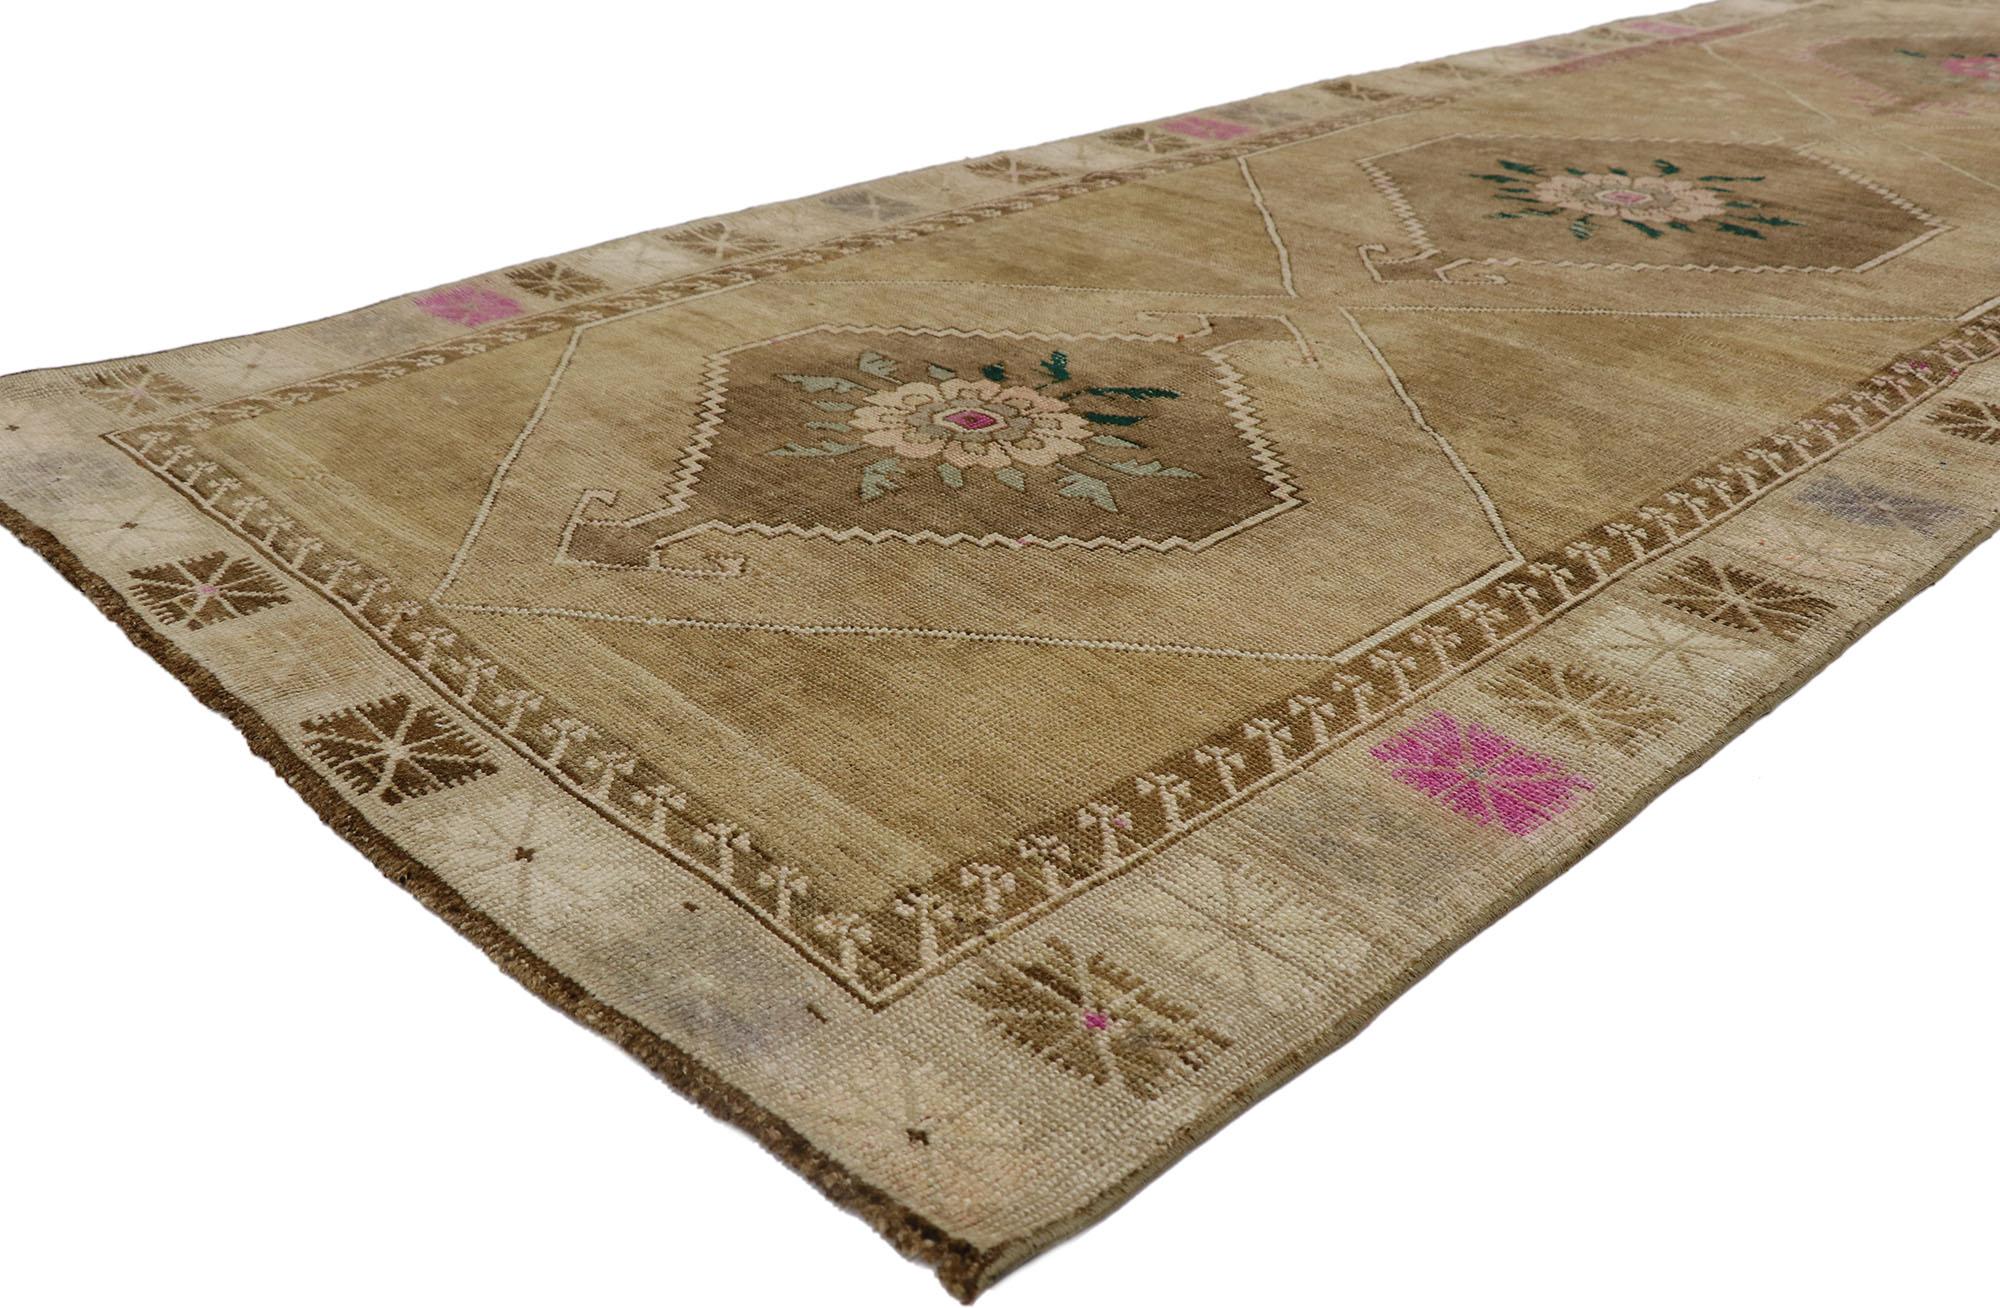 53579 Vintage Turkish Kars rug with Mid-Century Modern Style 04'07 x 12'06. With its warm hues and beguiling beauty, this hand-knotted wool vintage Turkish Kars runner will take on a curated lived-in look that feels timeless while imparting a sense